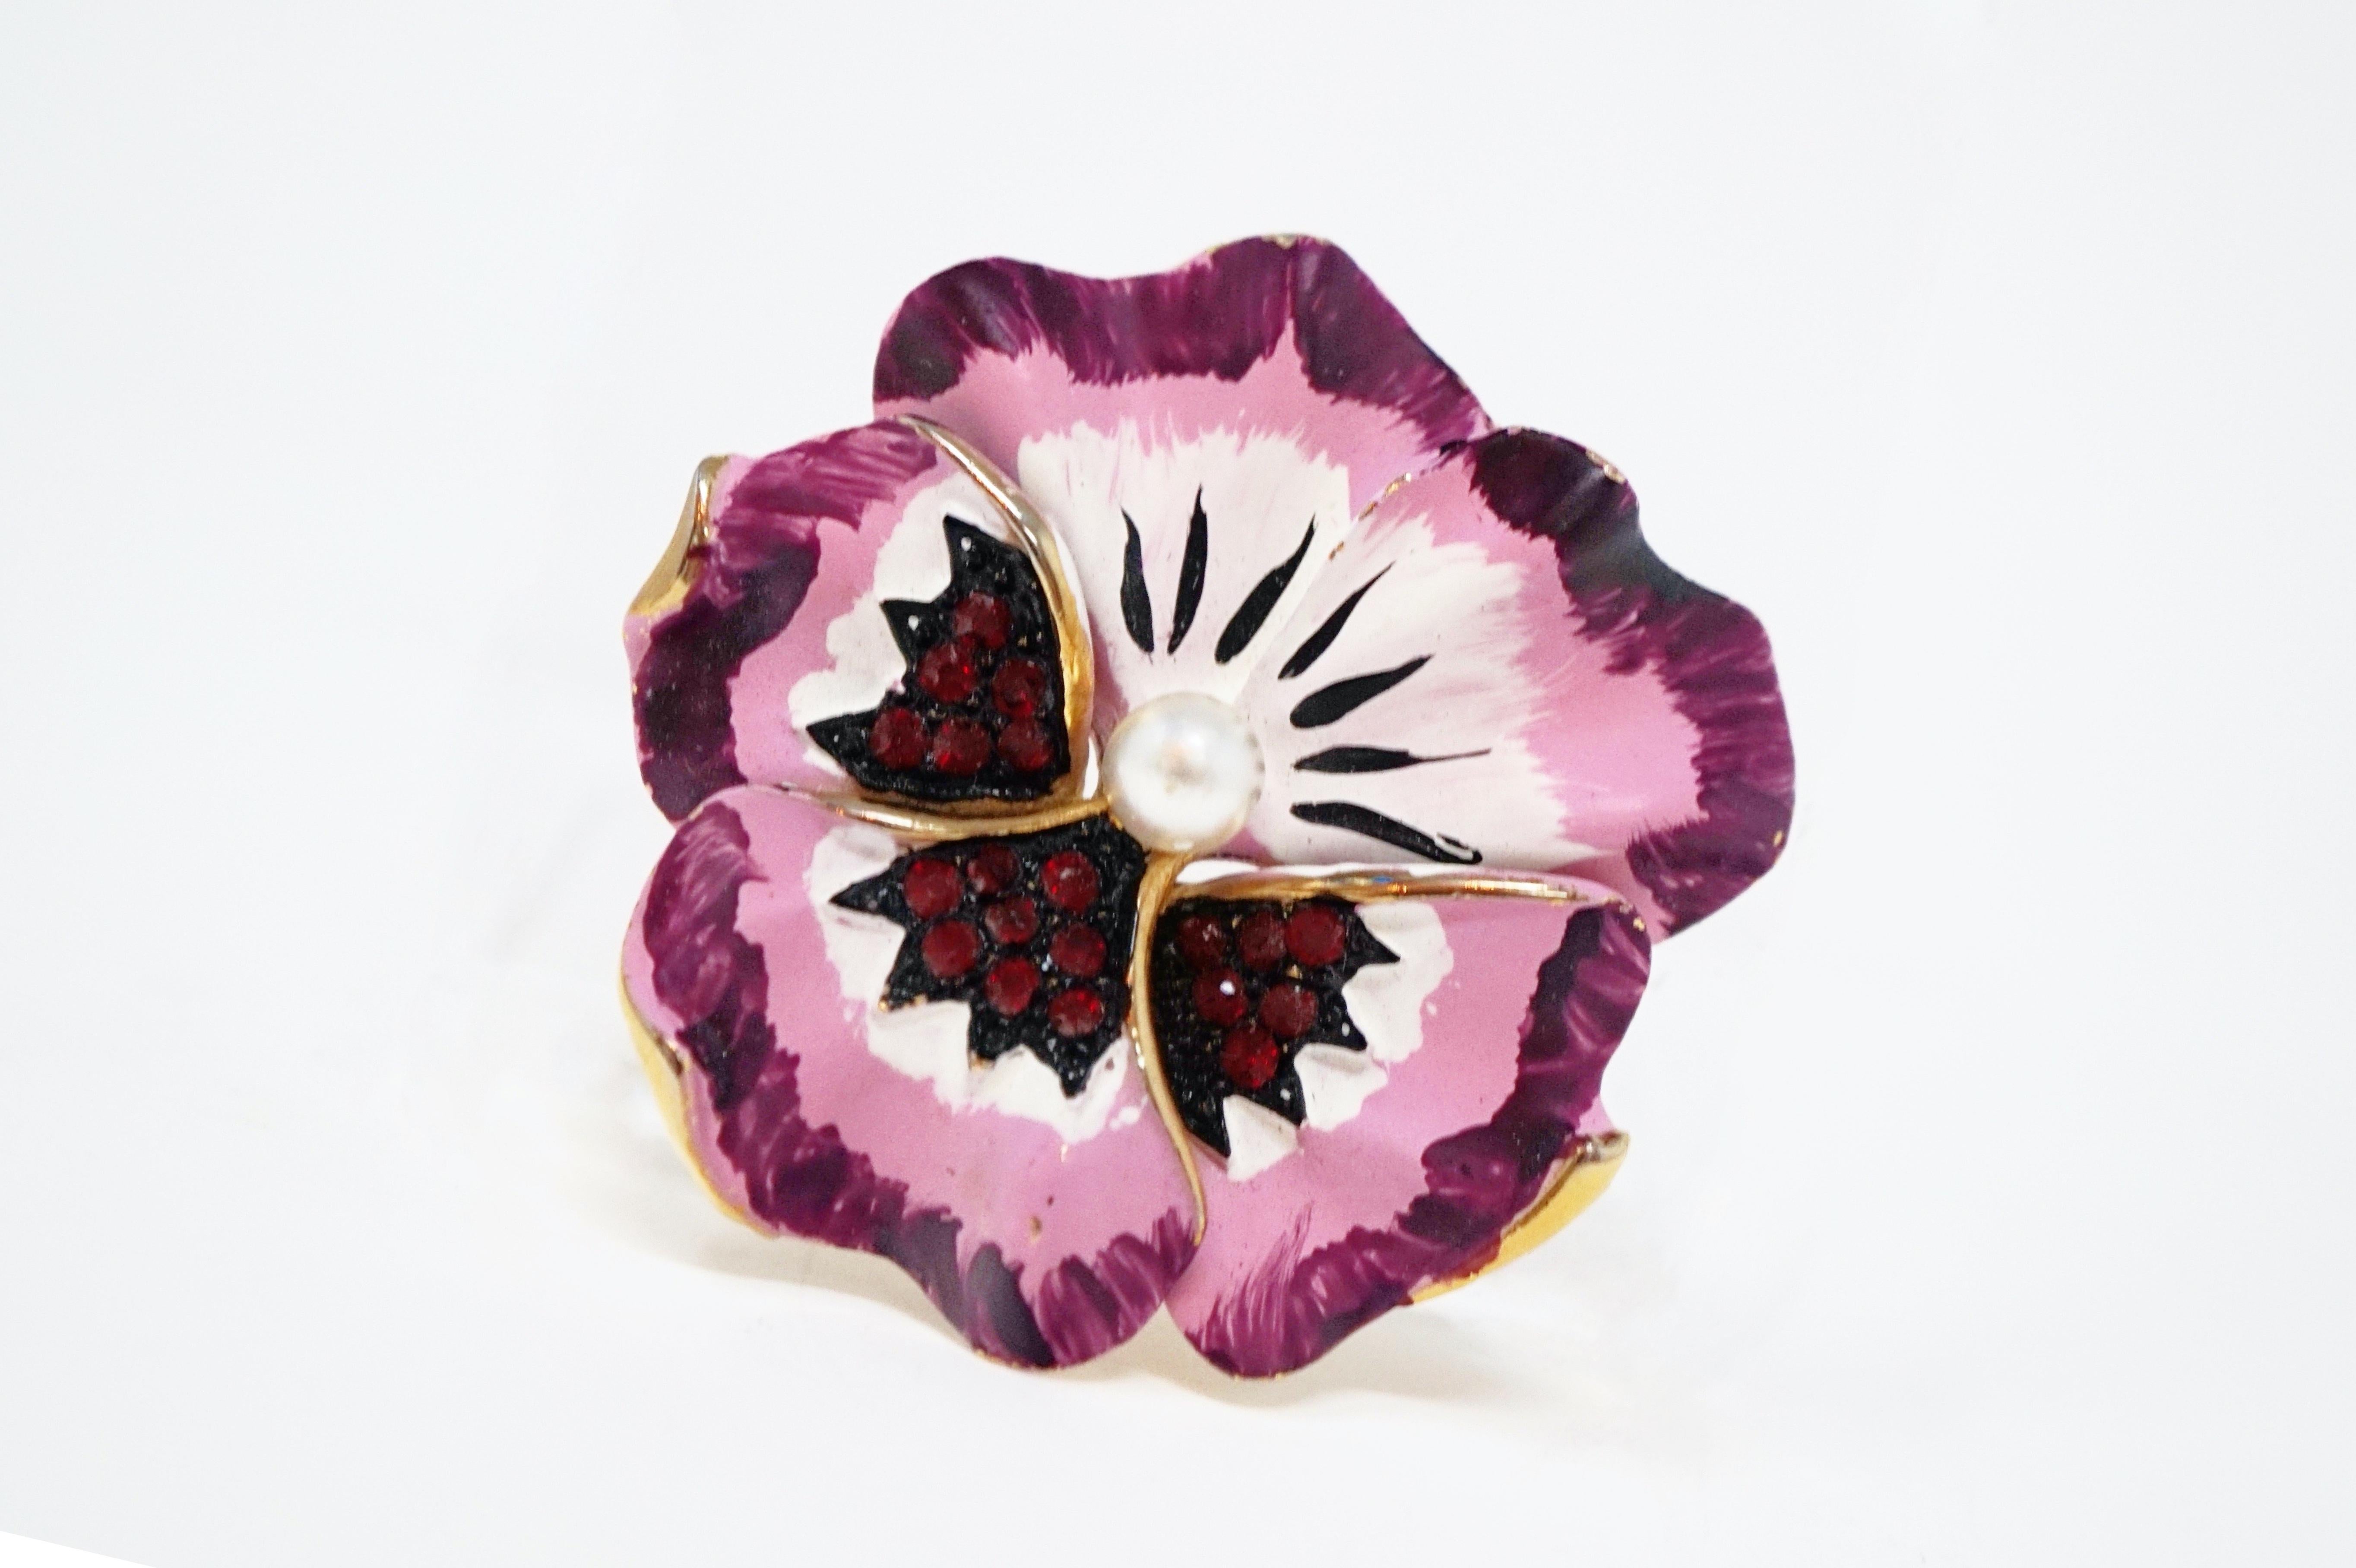 Modern Vintage Hand-Painted Pansy Flower Brooch, Attributed to Kramer Jewelry